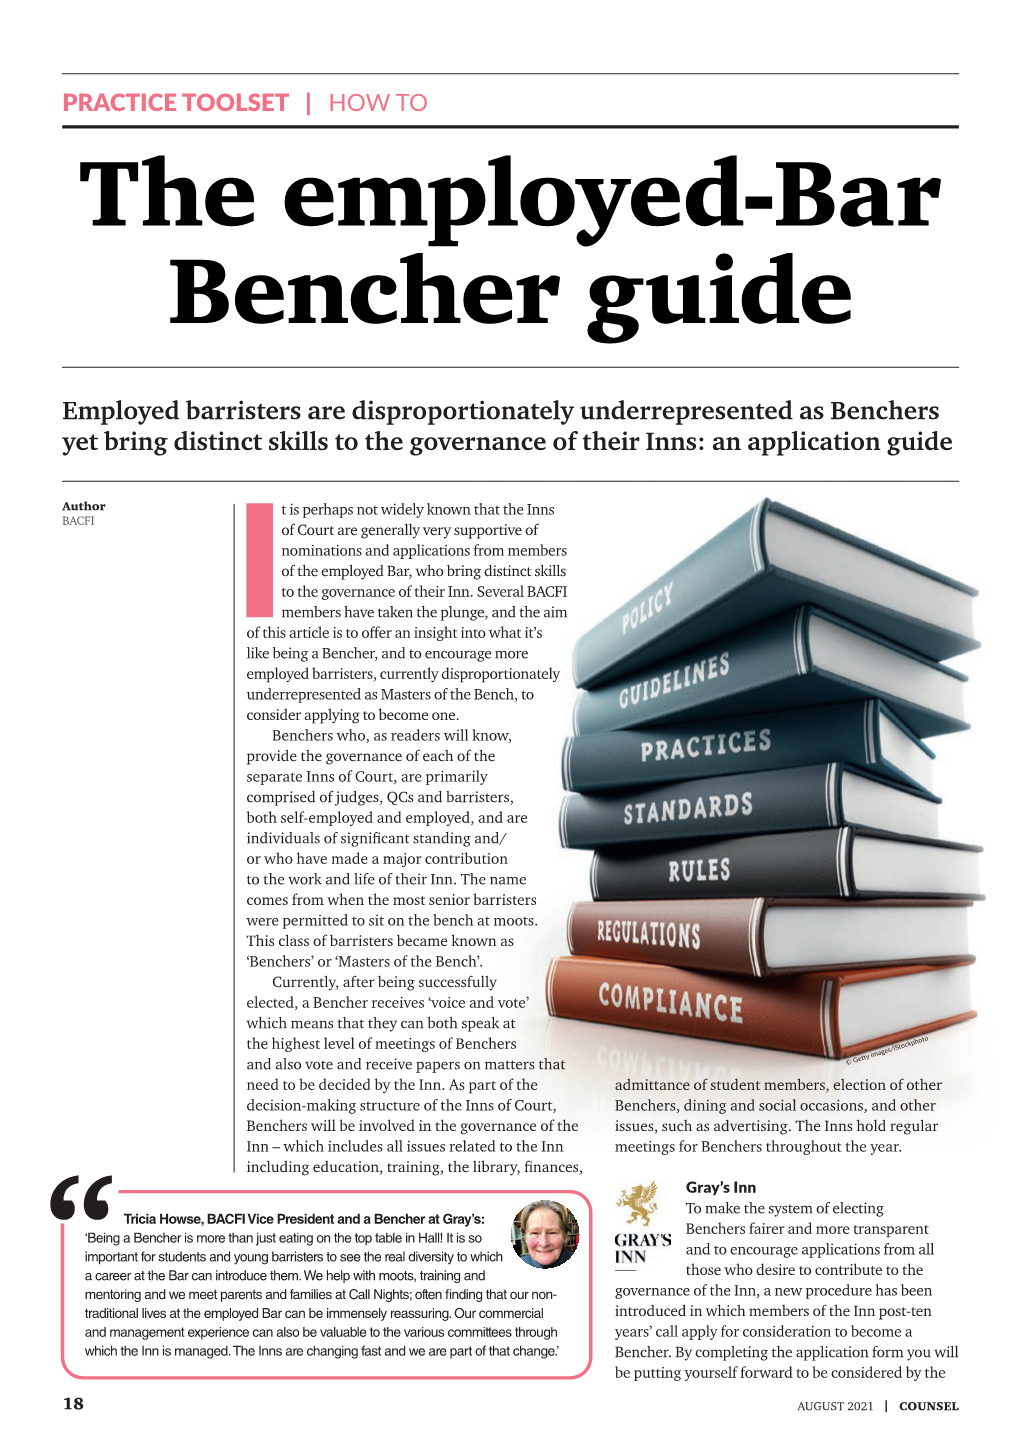 The Employed-Bar Bencher Guide